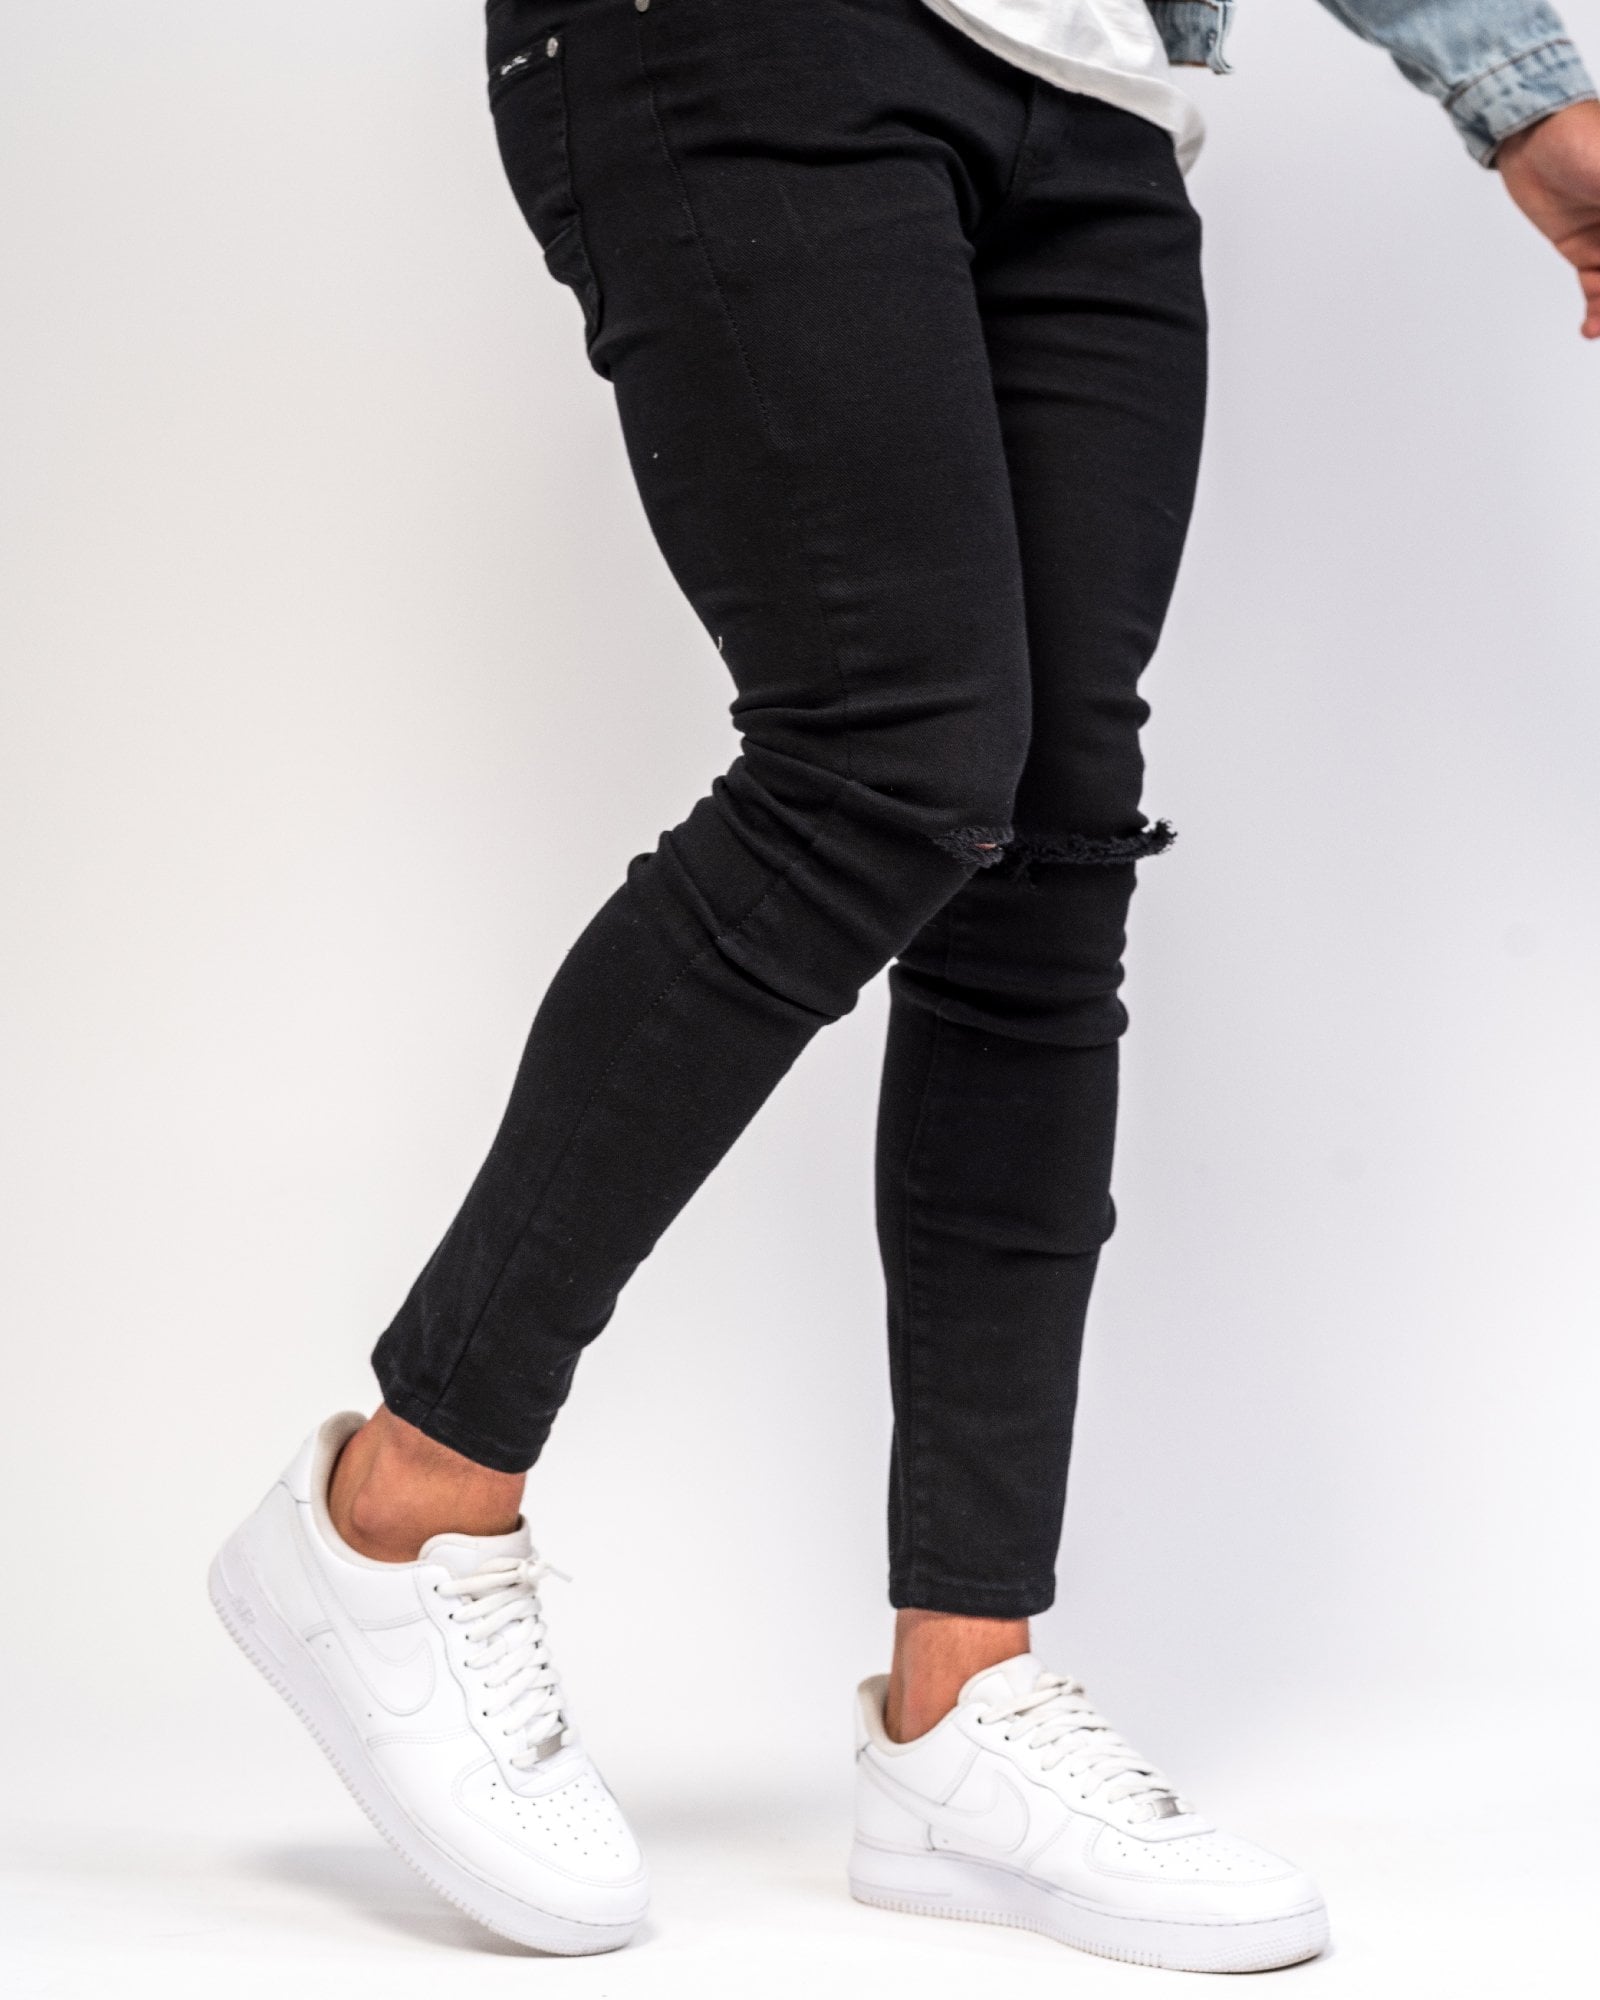 Logan Skinny Stretch Jeans in Light Black Twill with Ripped Knees